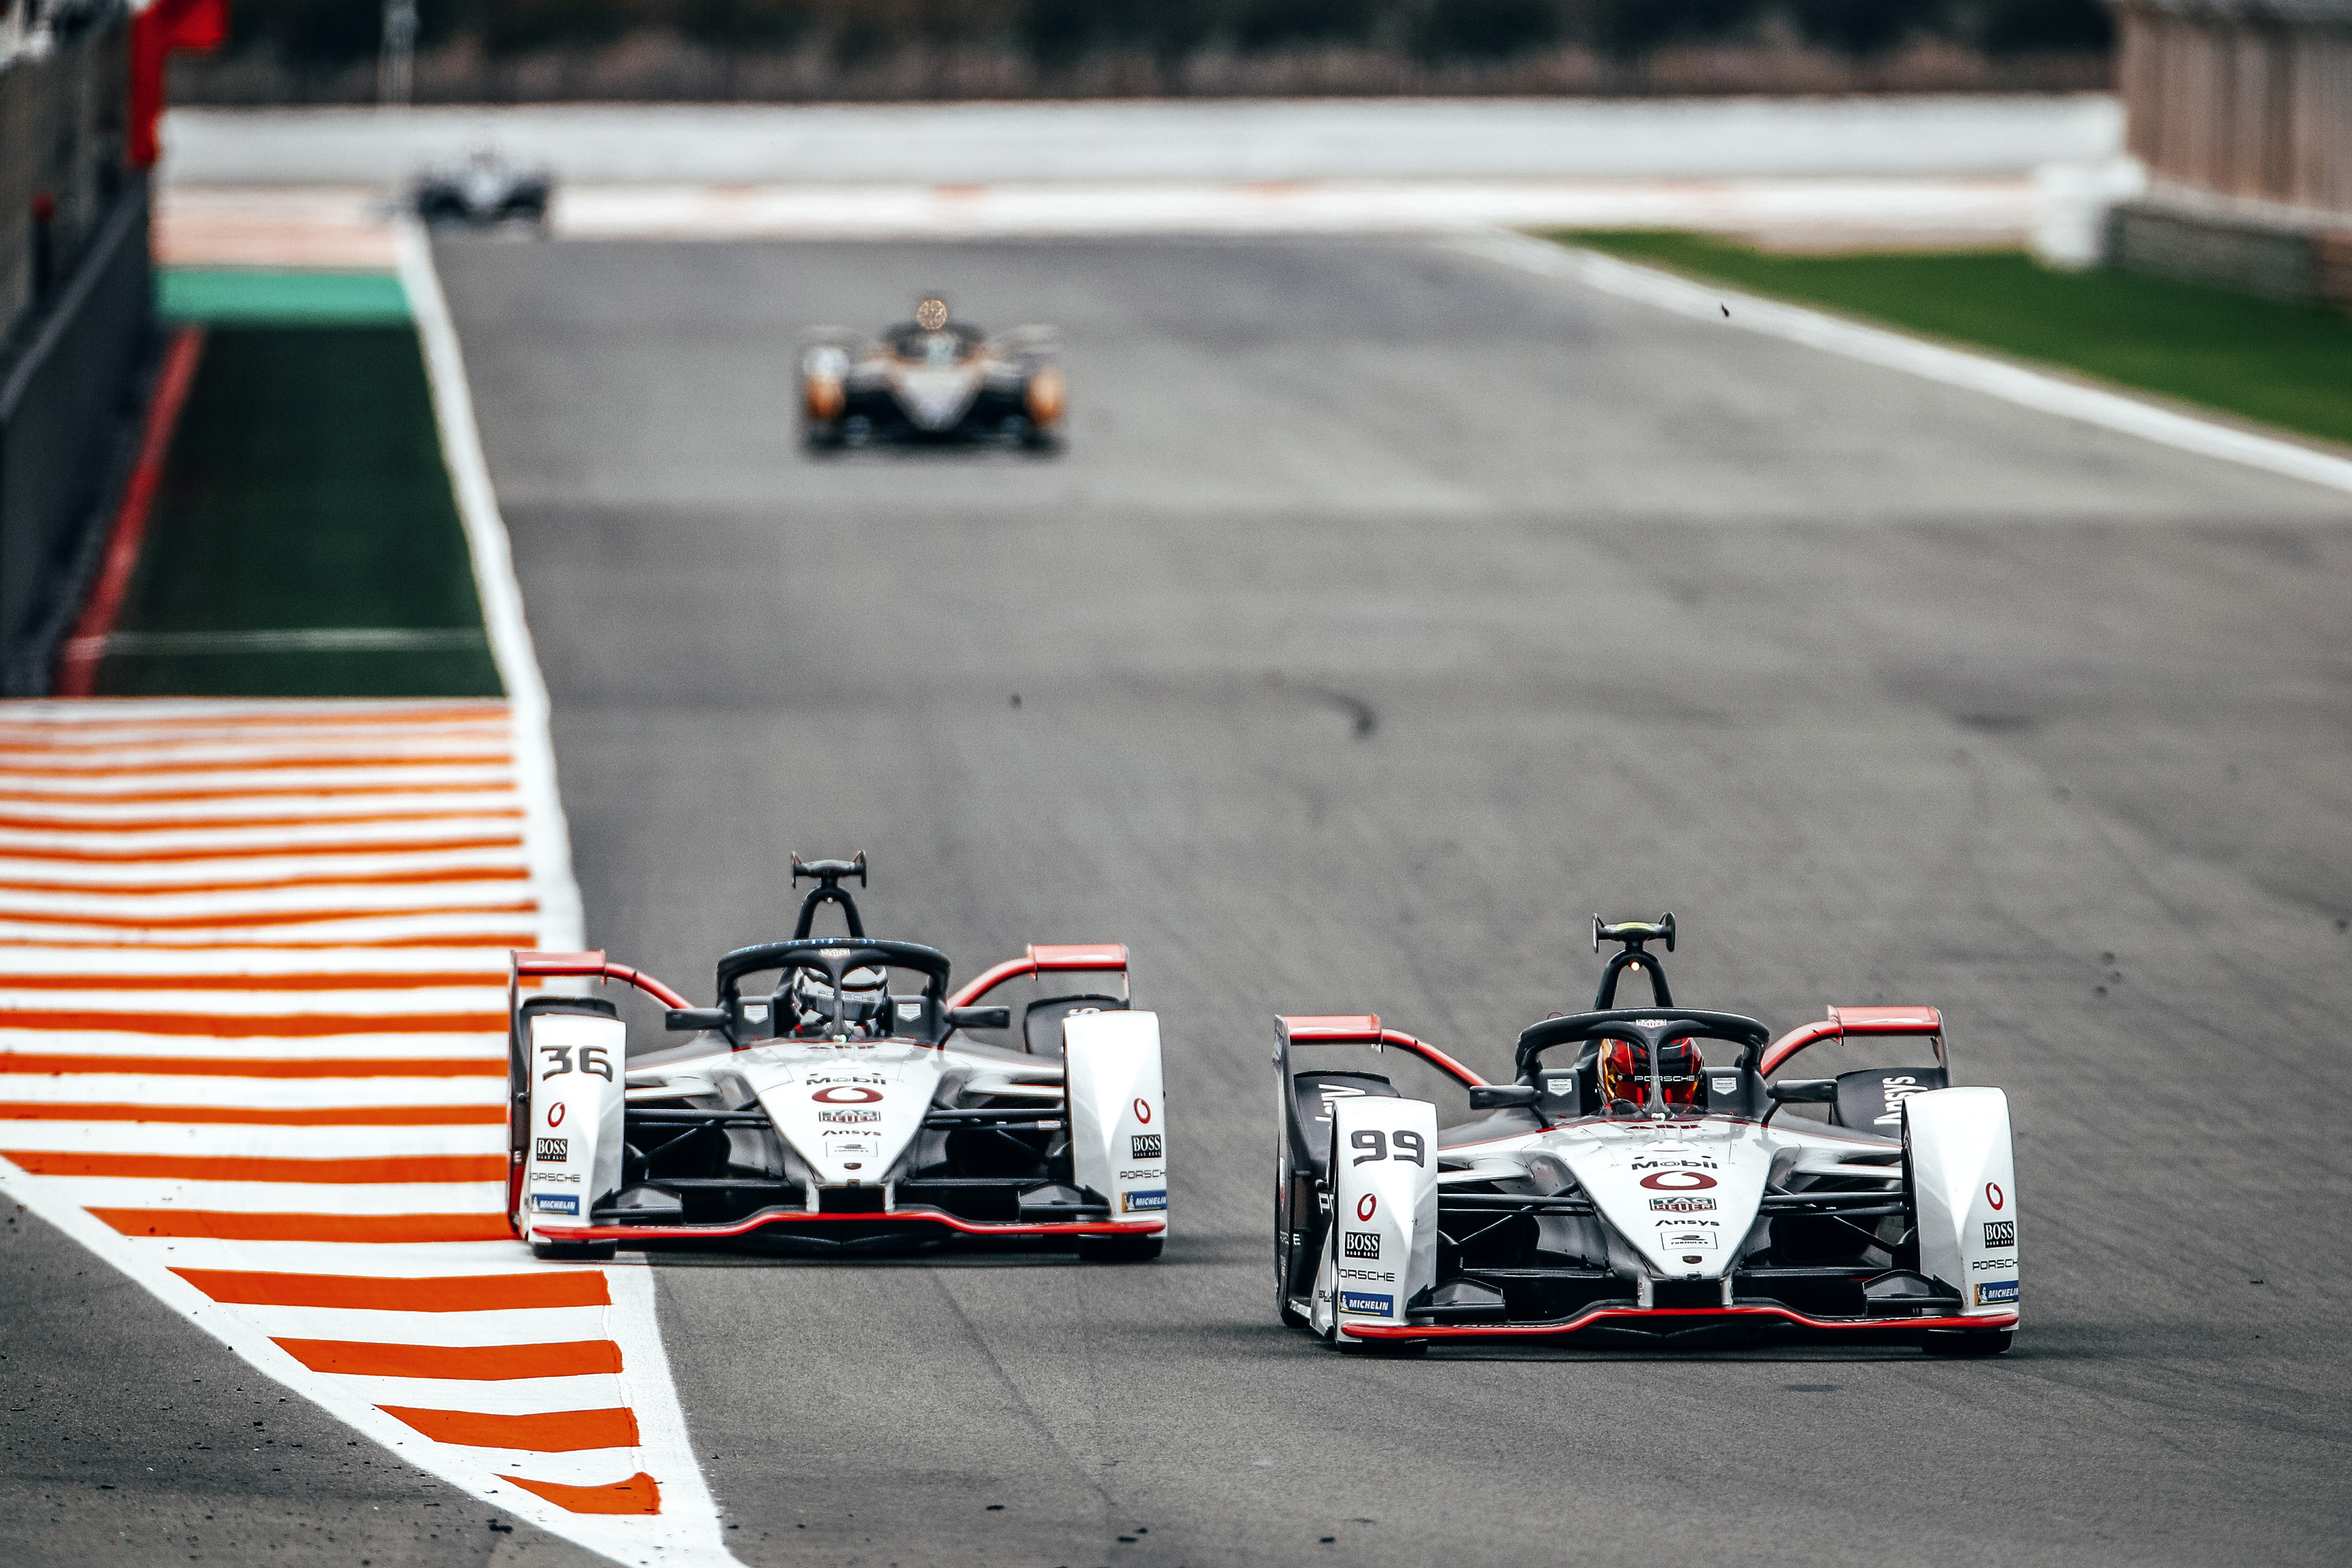 Two TAG Heuer Porsche Formula E cars side by side